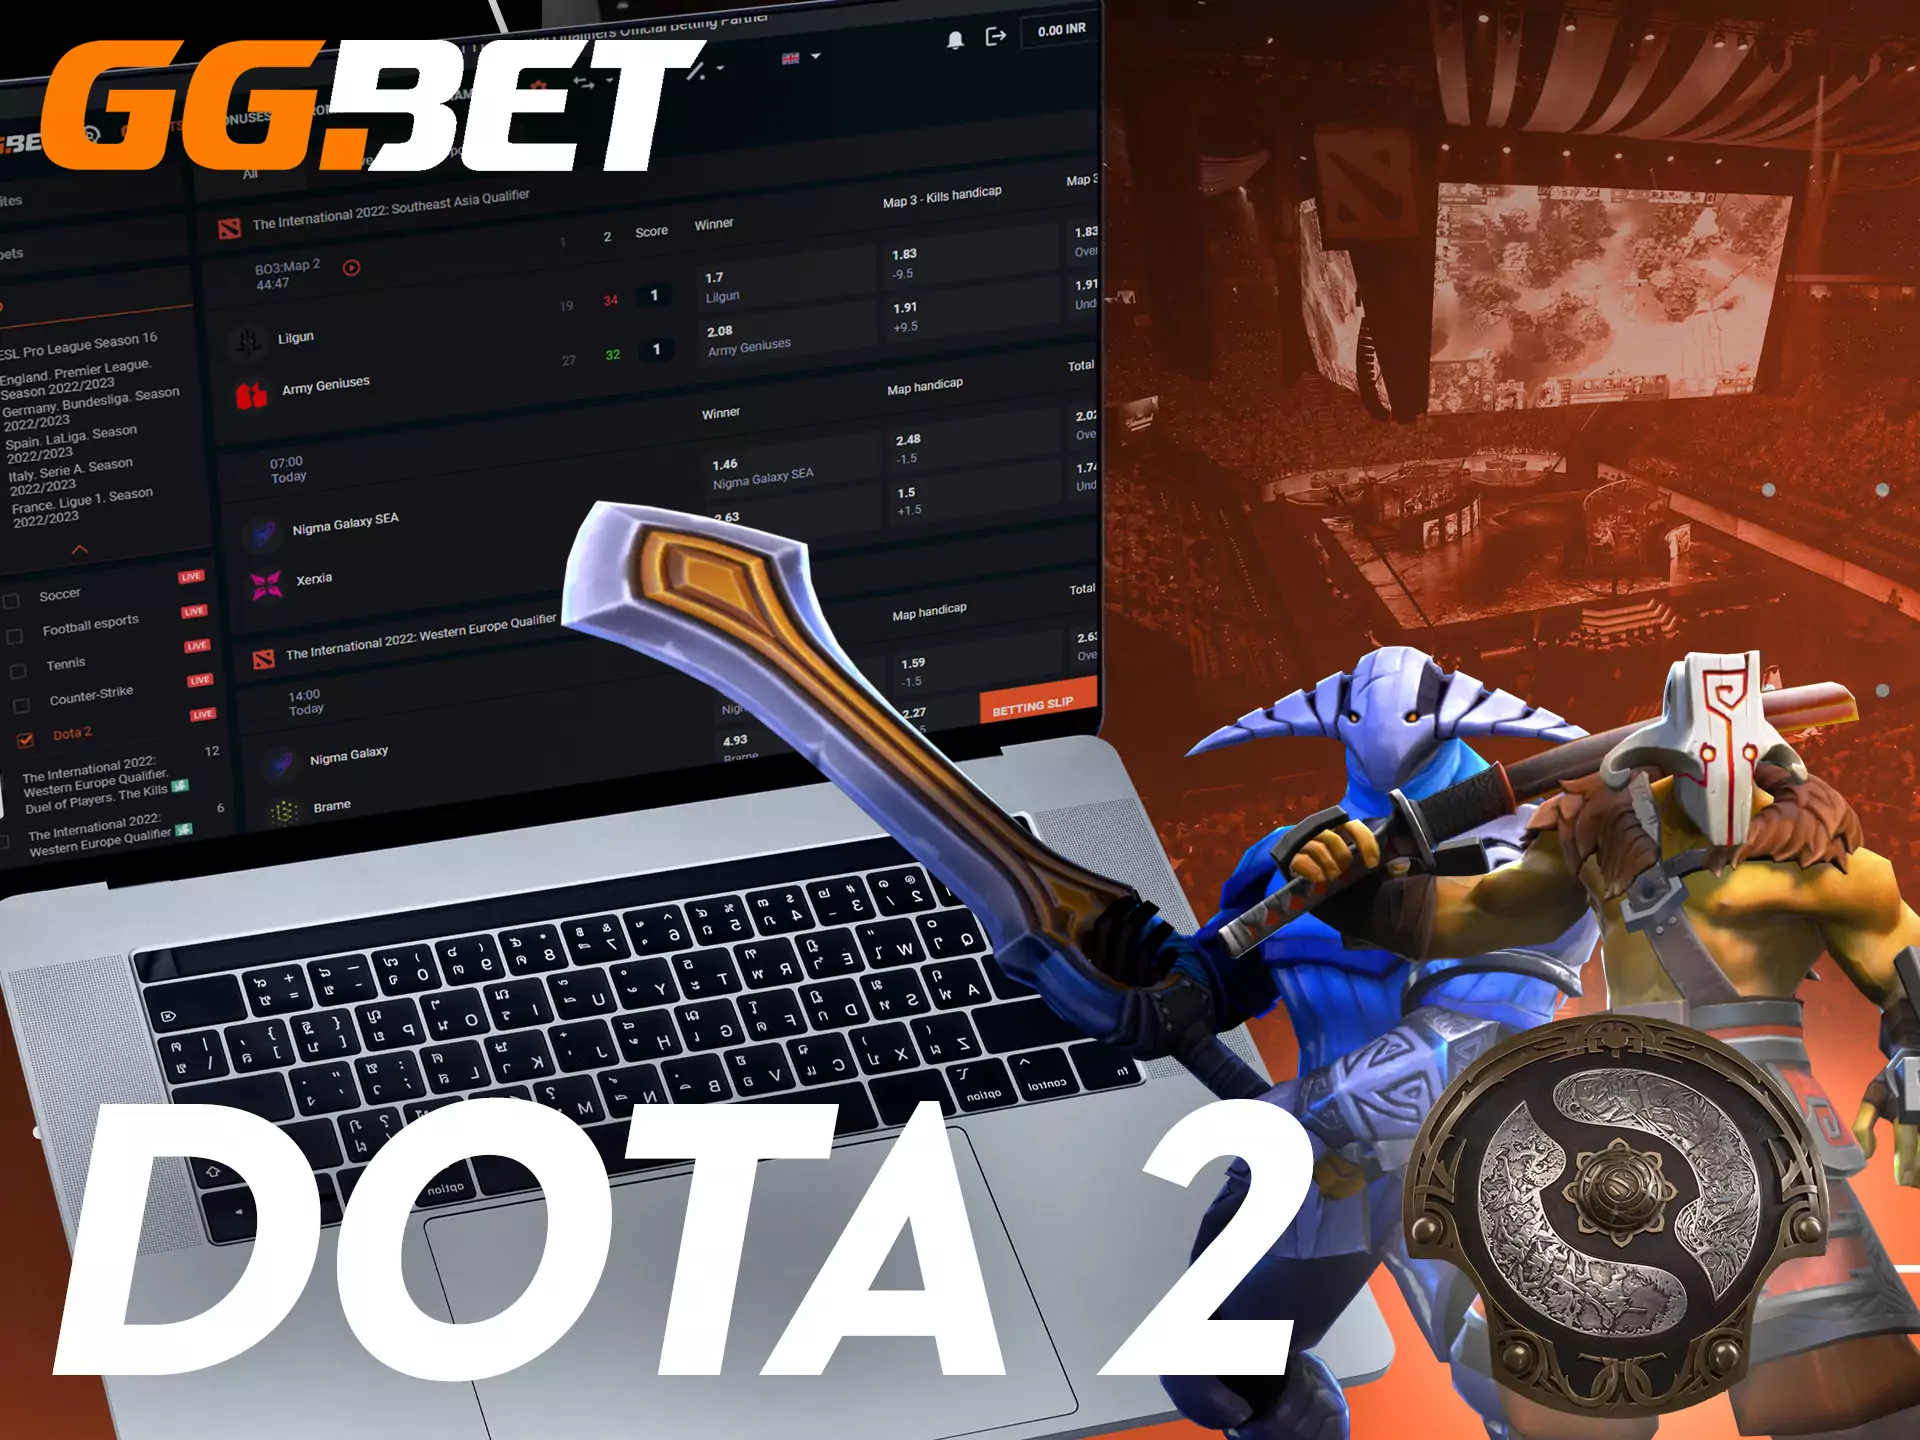 In the GGBet sportsbook, you also find the Dota 2 tournaments.